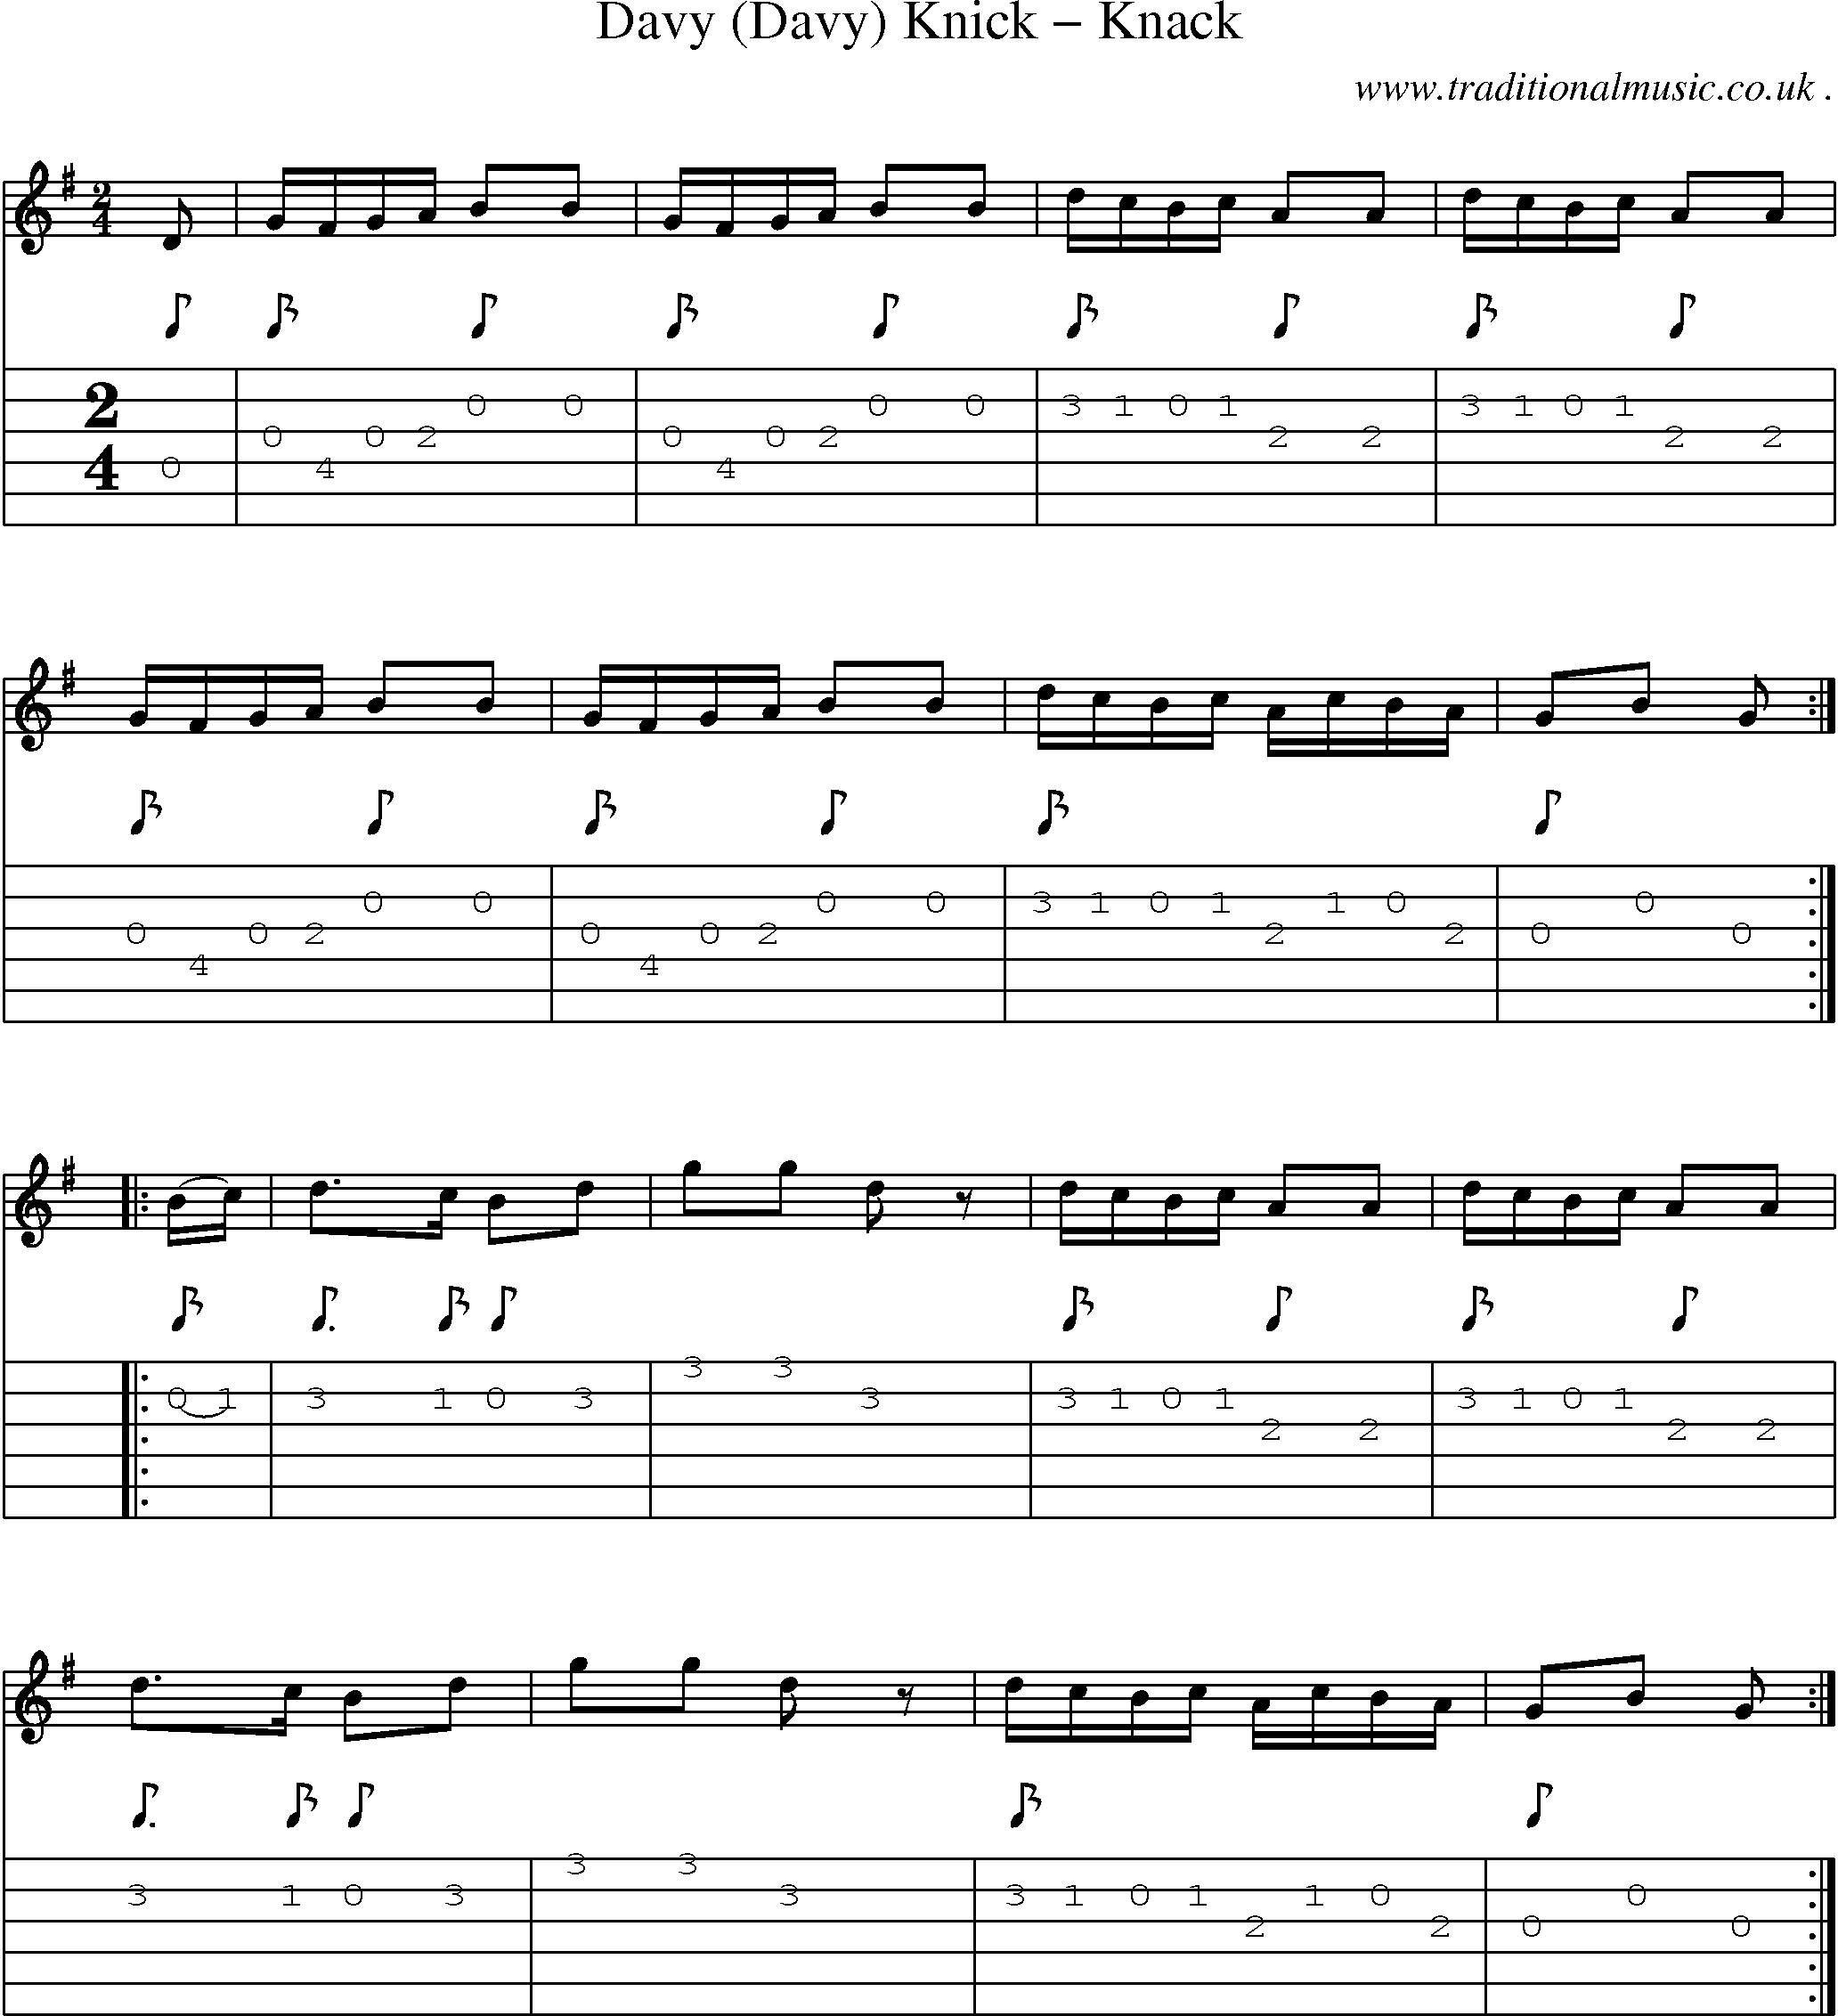 Sheet-Music and Guitar Tabs for Davy (davy) Knick Knack